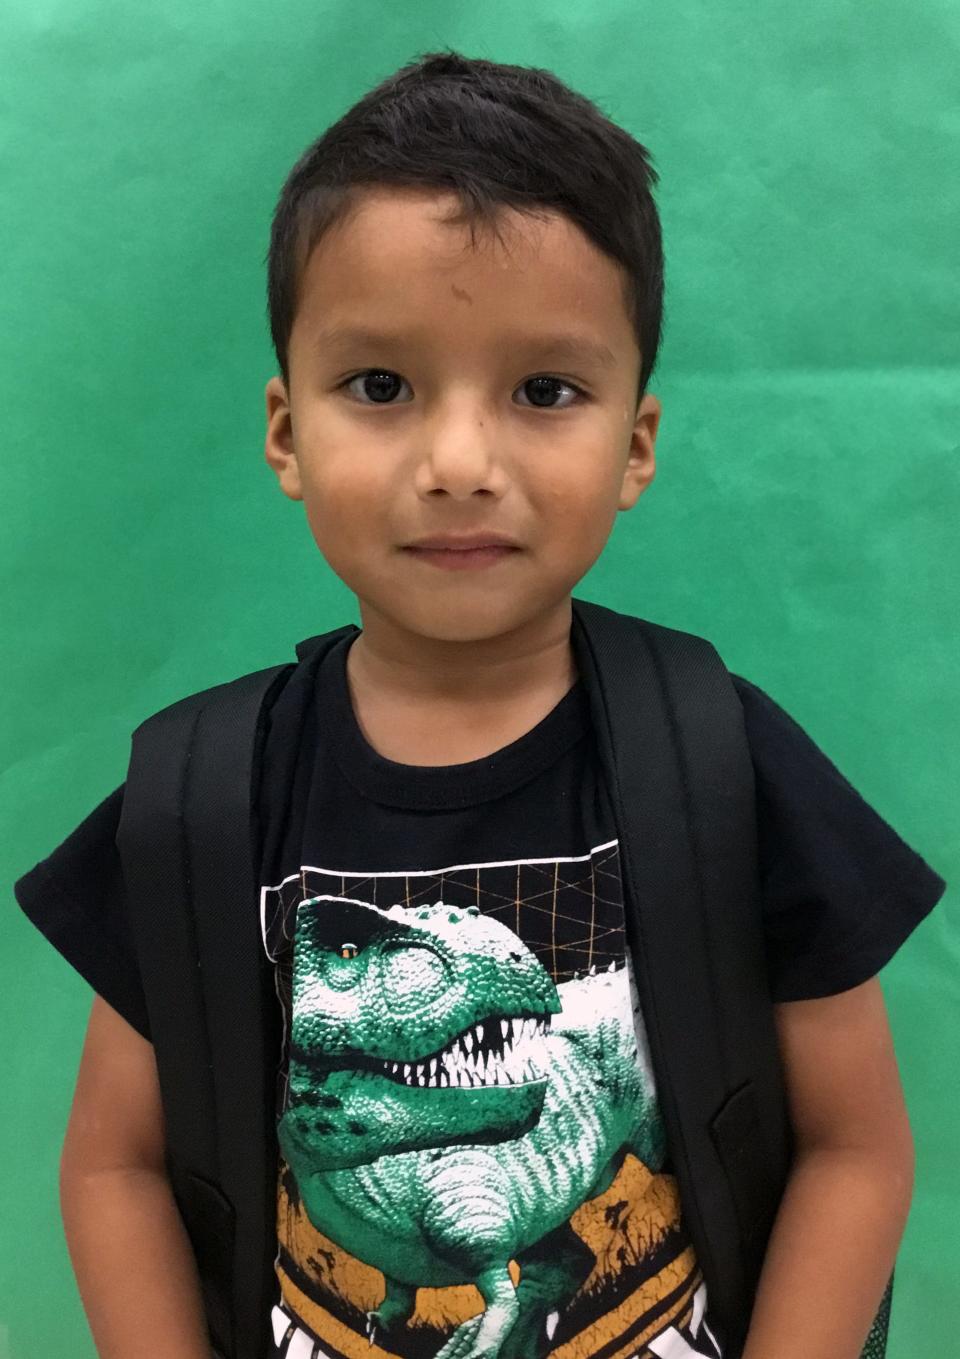 Ulises Rodriguez Montoya loved dinosaurs. “He always had a dinosaur drawn on all of the assignments he turned in,” said Naira (Dina) Solís Shears, his pre-K bilingual teacher.